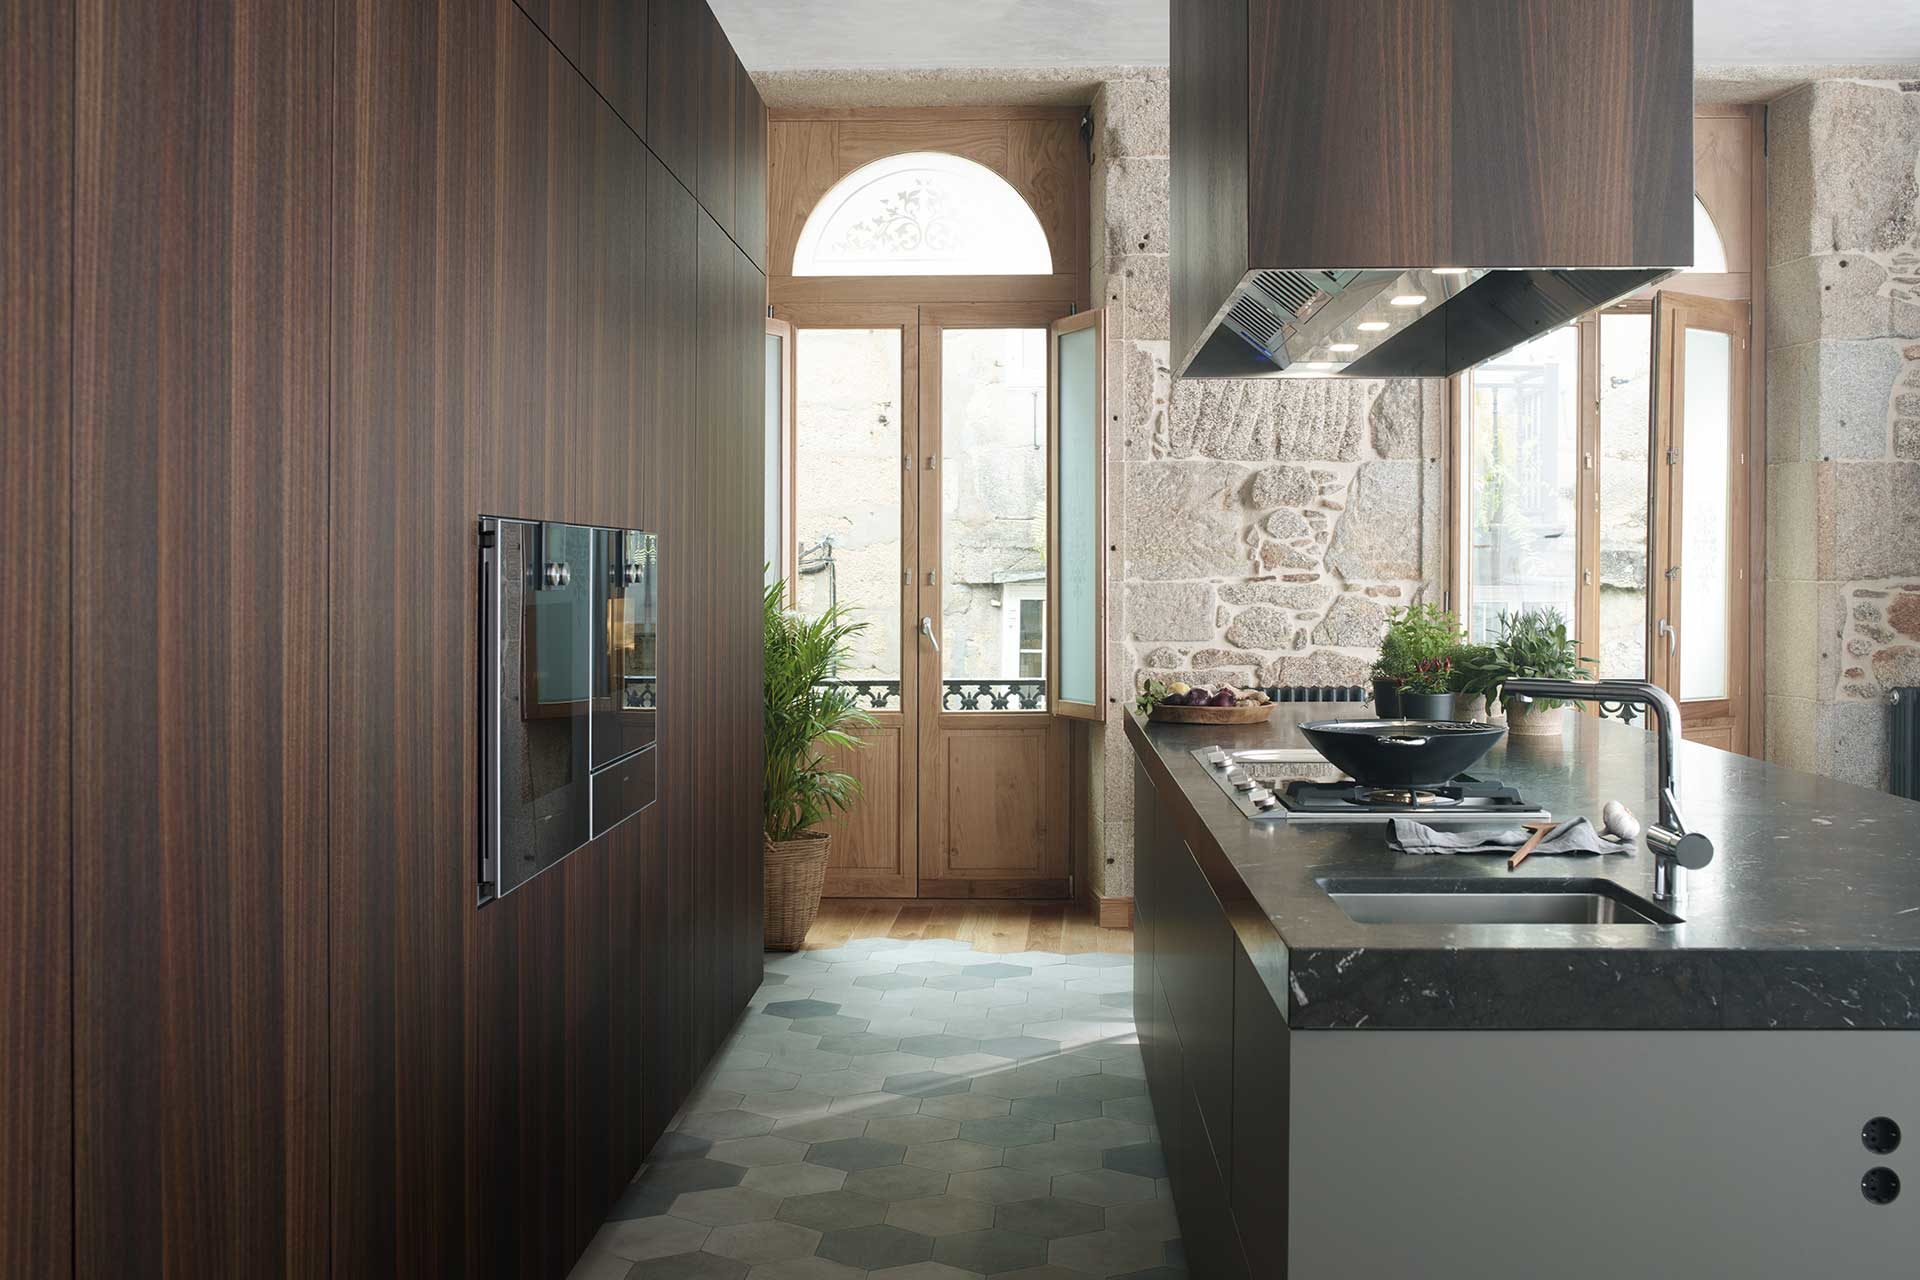 Image of wooden kitchen with practical modules and a central island with an extractor hood in the same wooden finish